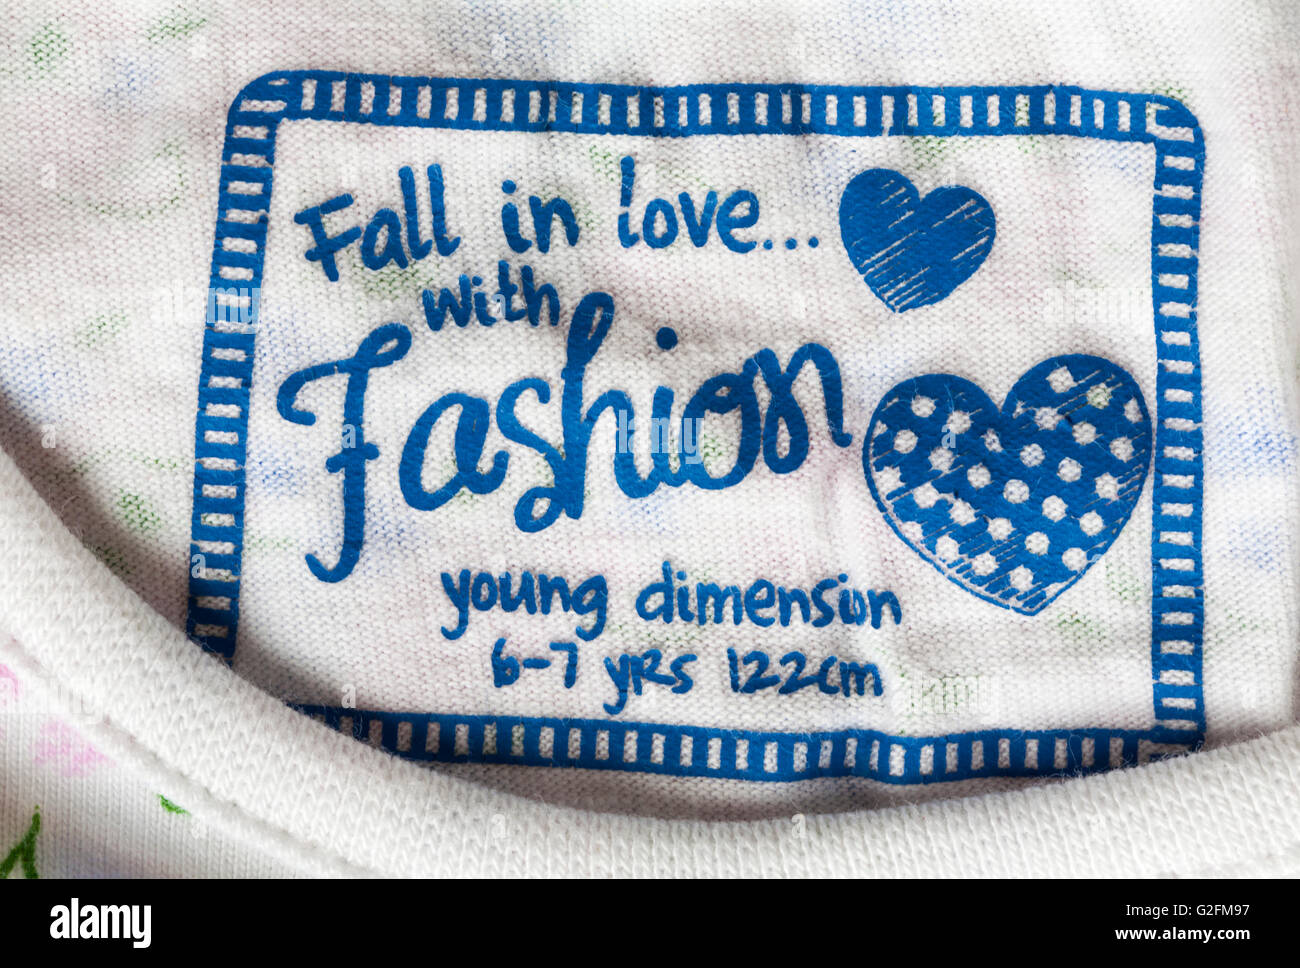 fall in love with fashion label in young dimension girls top Stock Photo